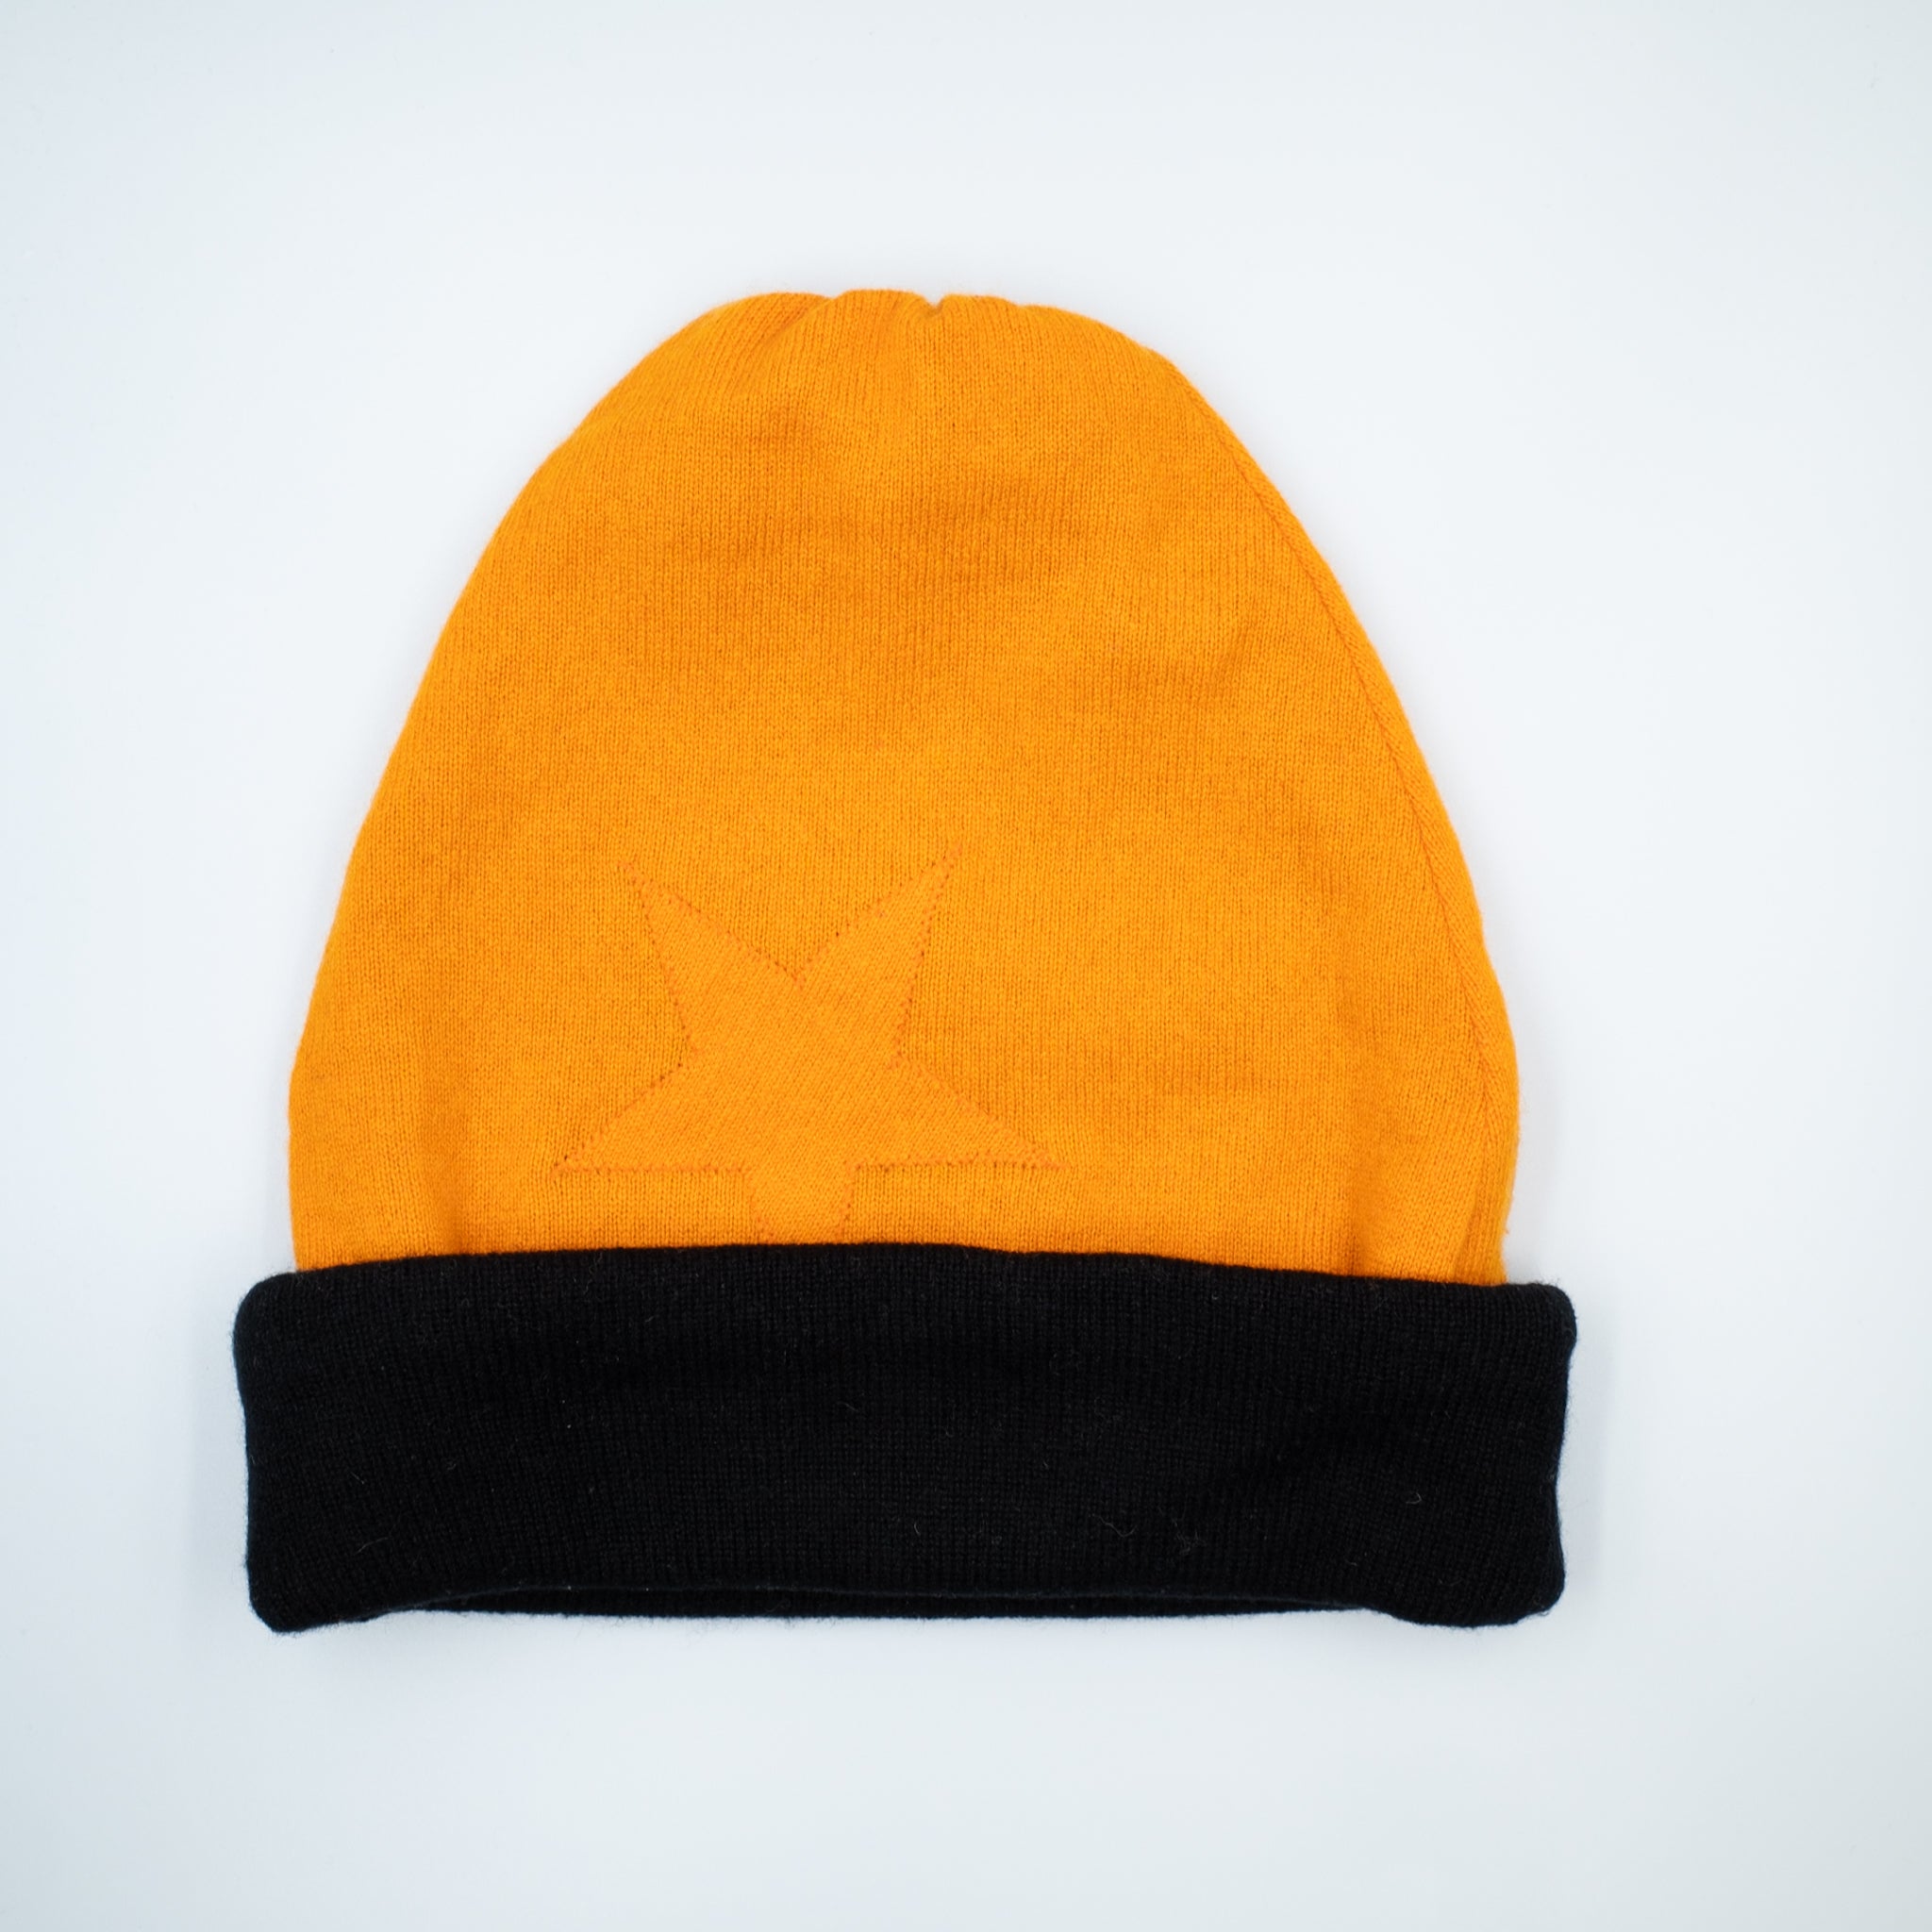 Flame Orange and Black Reversible Slouchy Beanie Hat